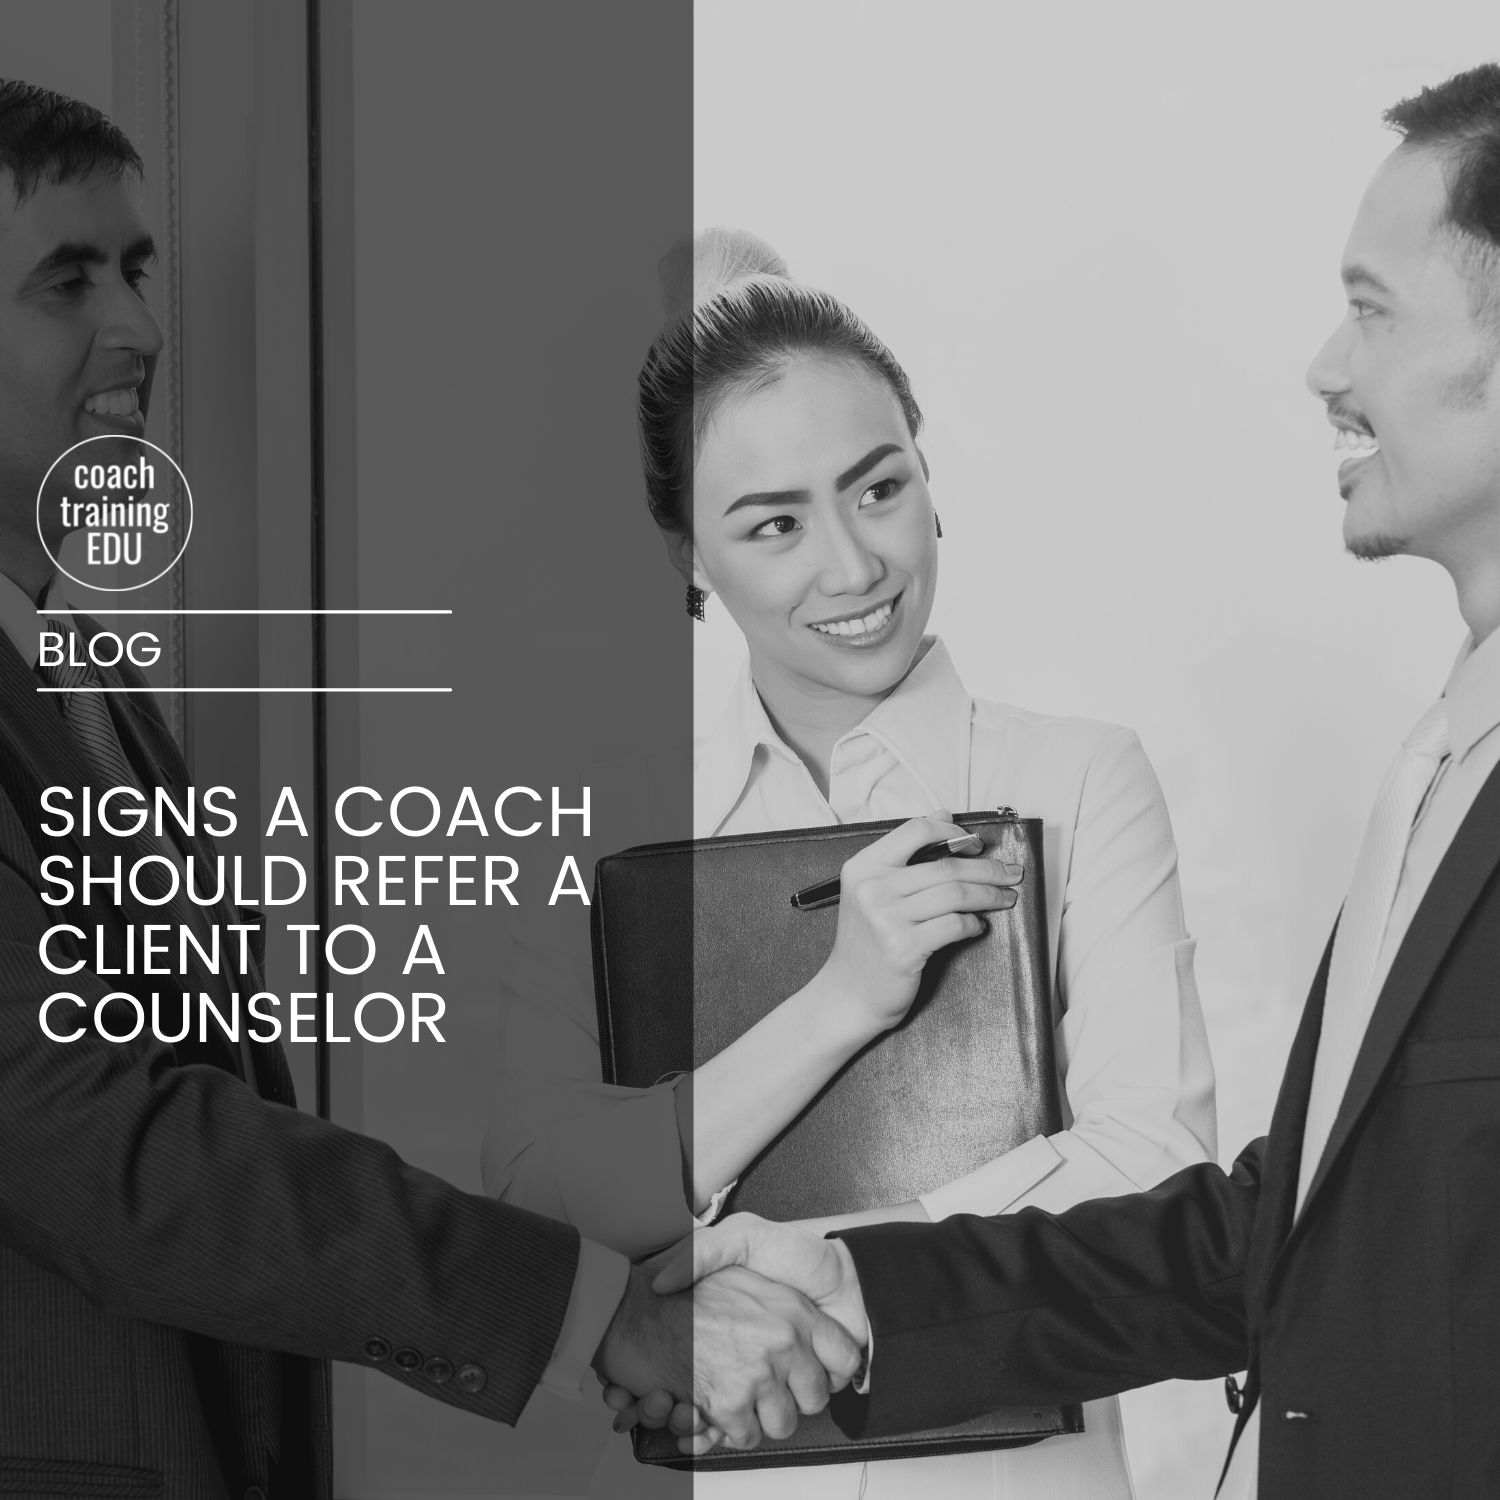 Signs a Coach Should Refer a Client to a Counselor